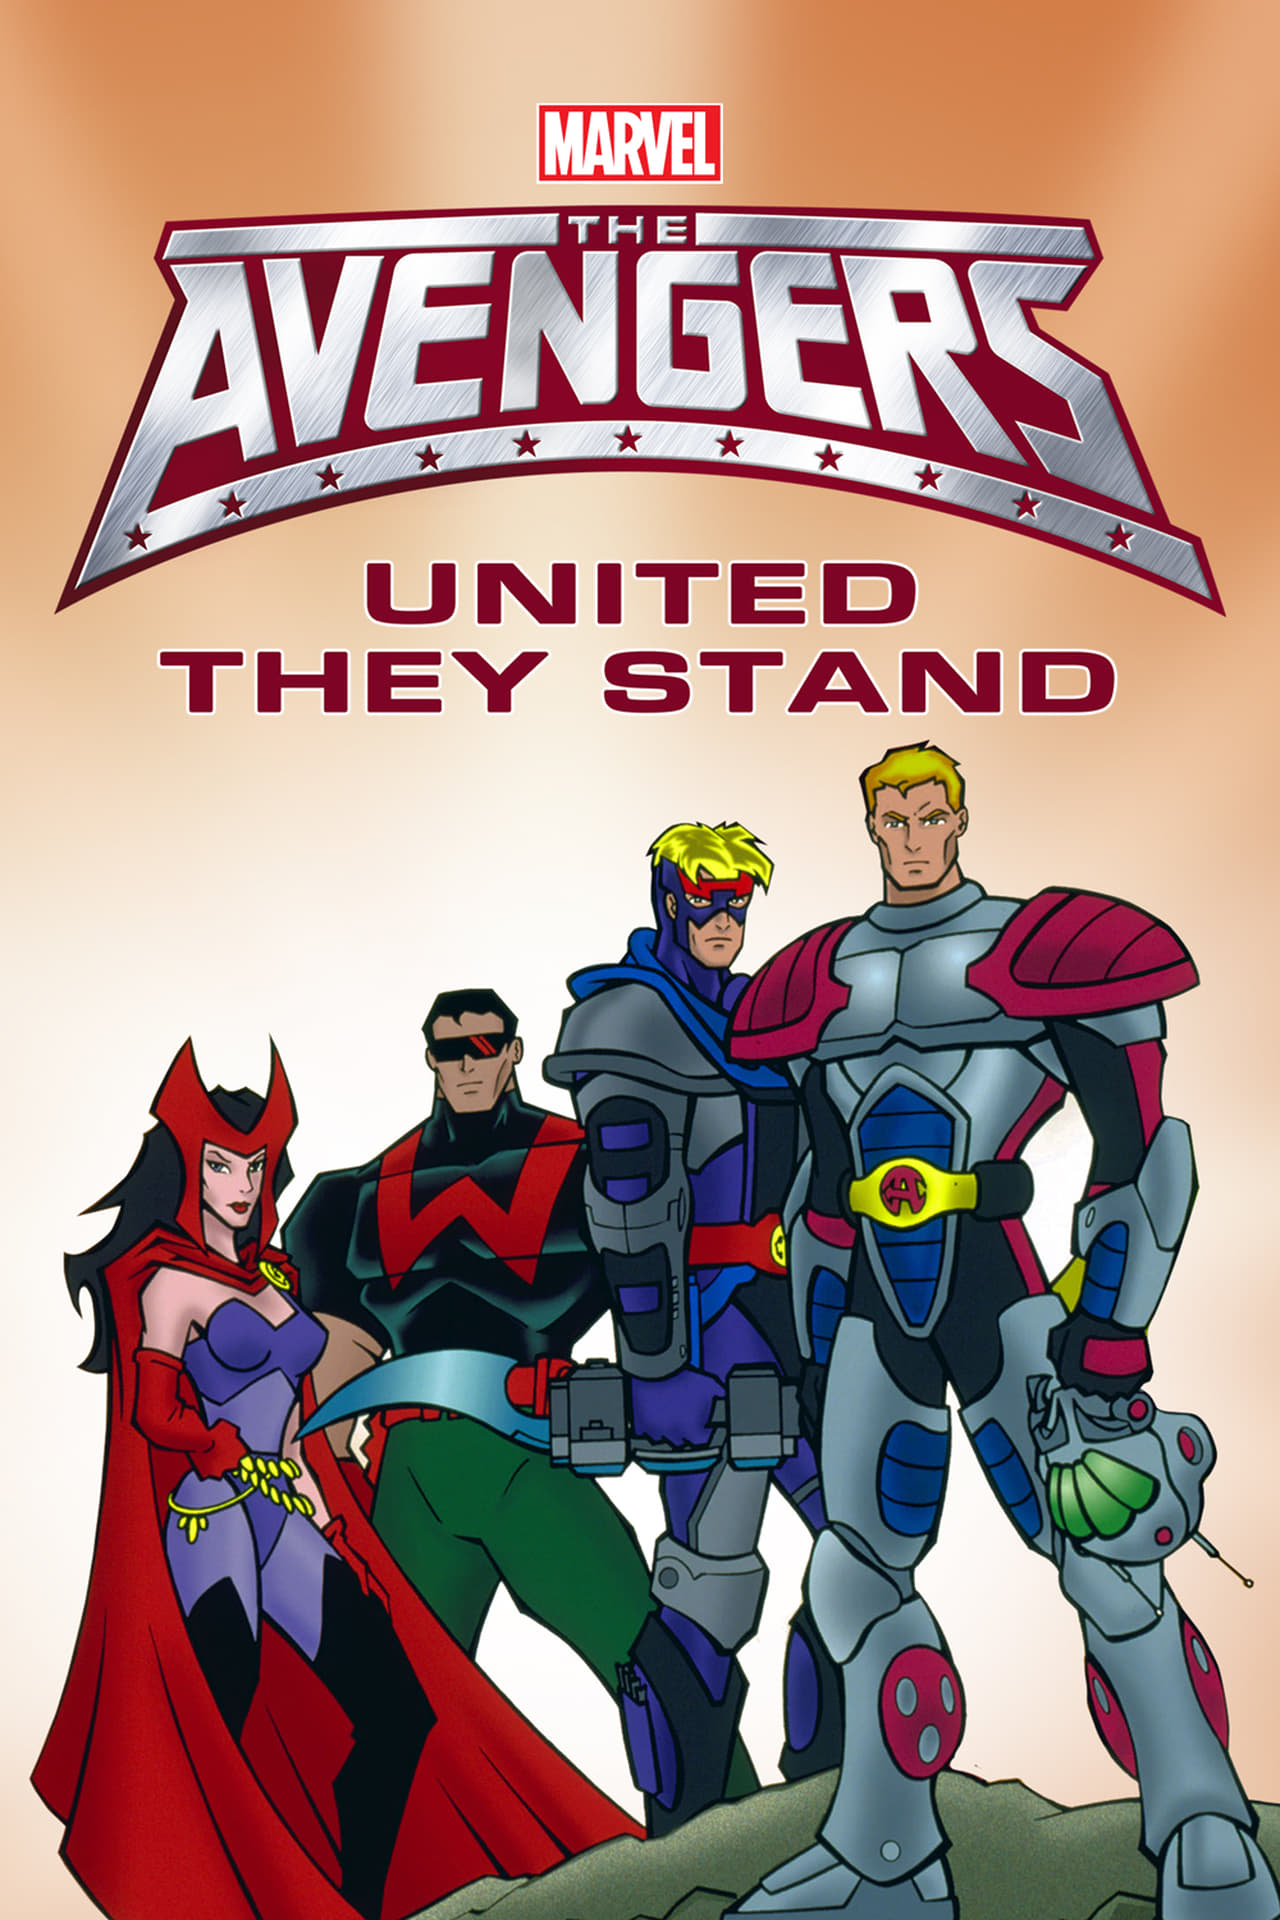 The Avengers: United They Stand (1999&2000) S1 EP01&EP13 128Kbps 23.976Fps 48Khz 2.0Ch Disney+ DD+ E-AC3 Turkish Audio TAC